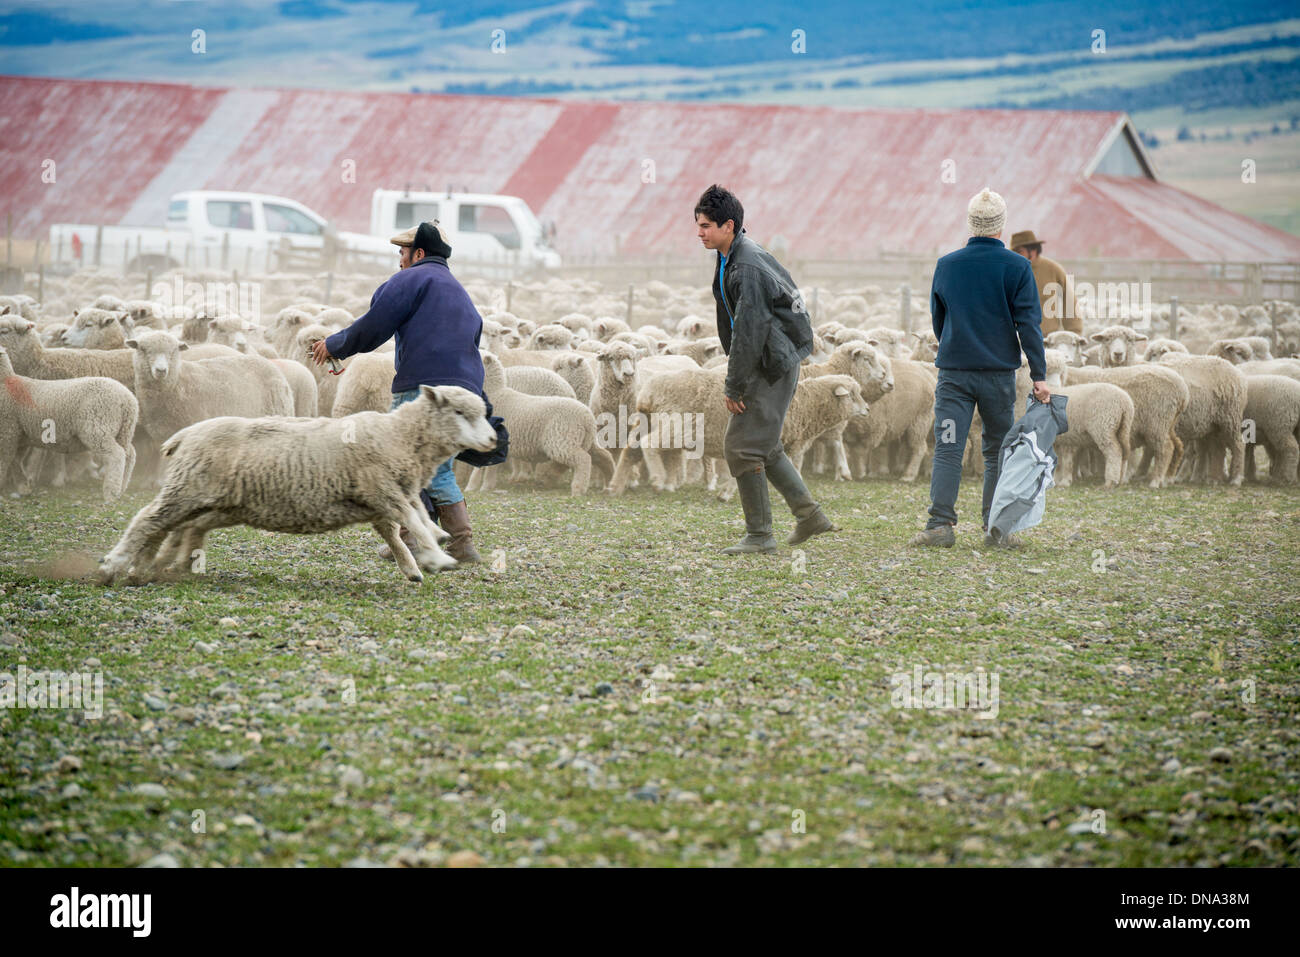 Lamb Escaping as Shepherds Herd, patagonia Chile Stock Photo